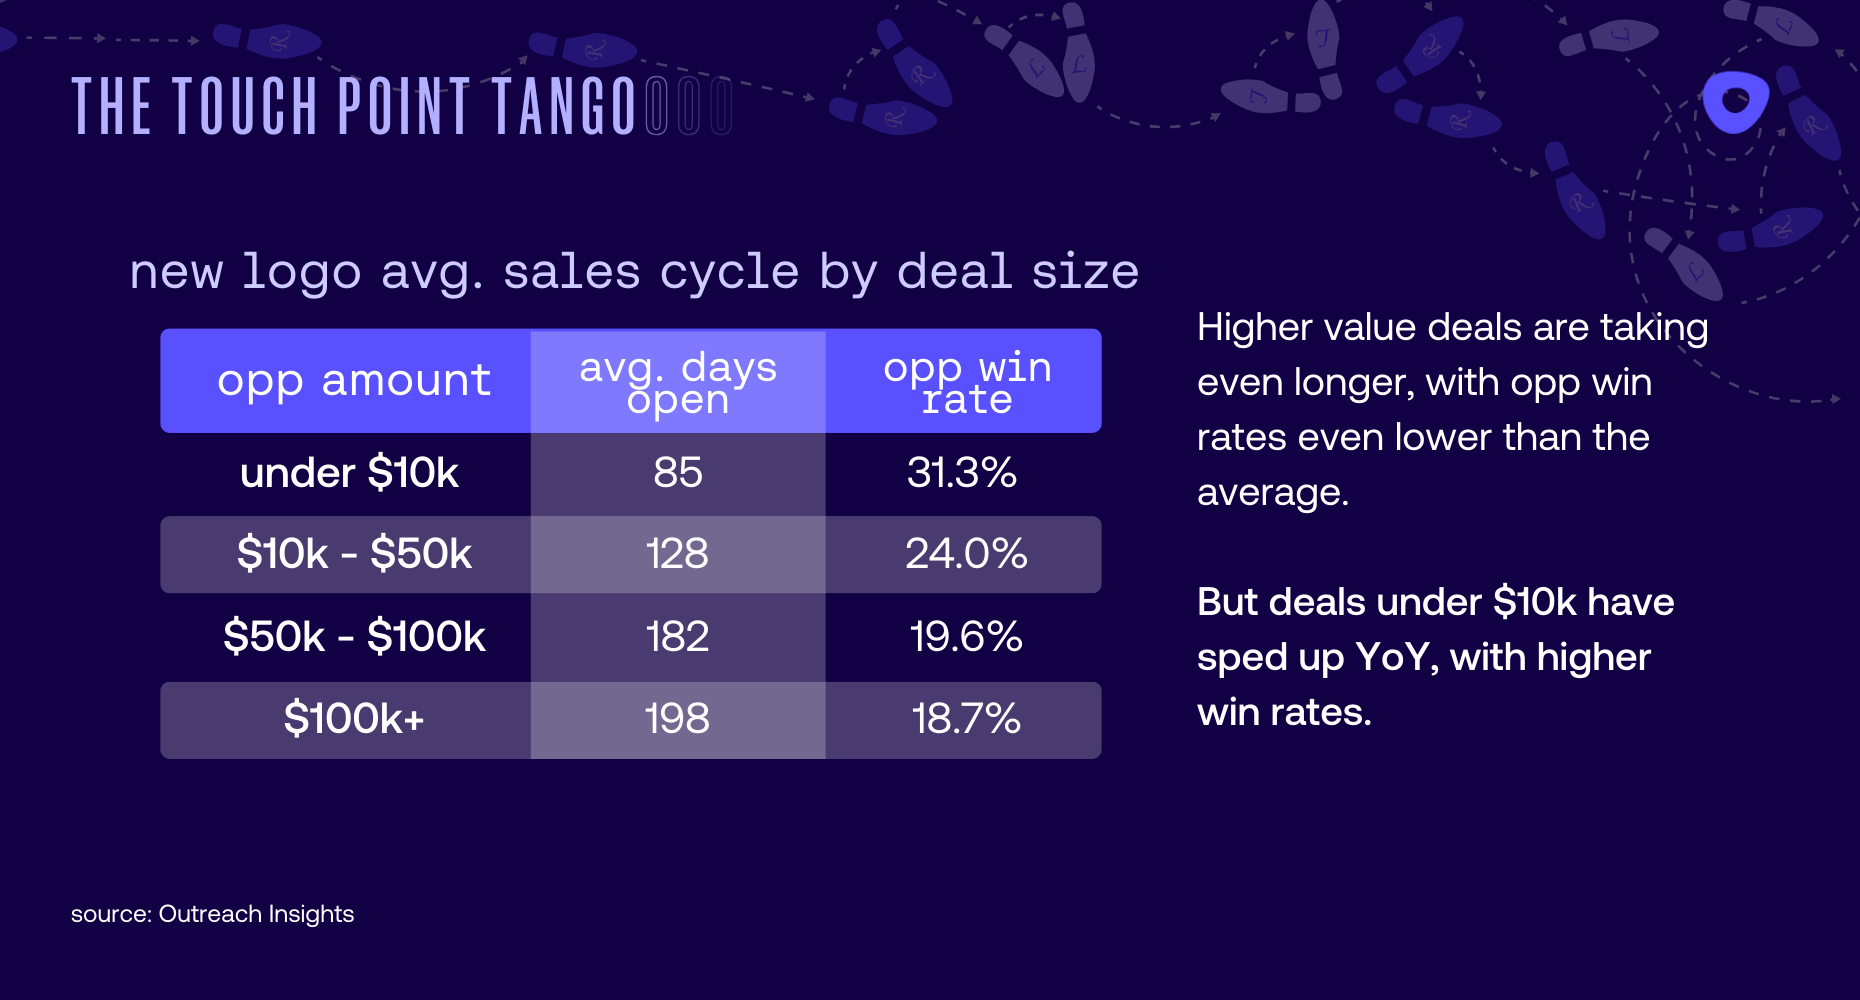 Sales cycle by deal size